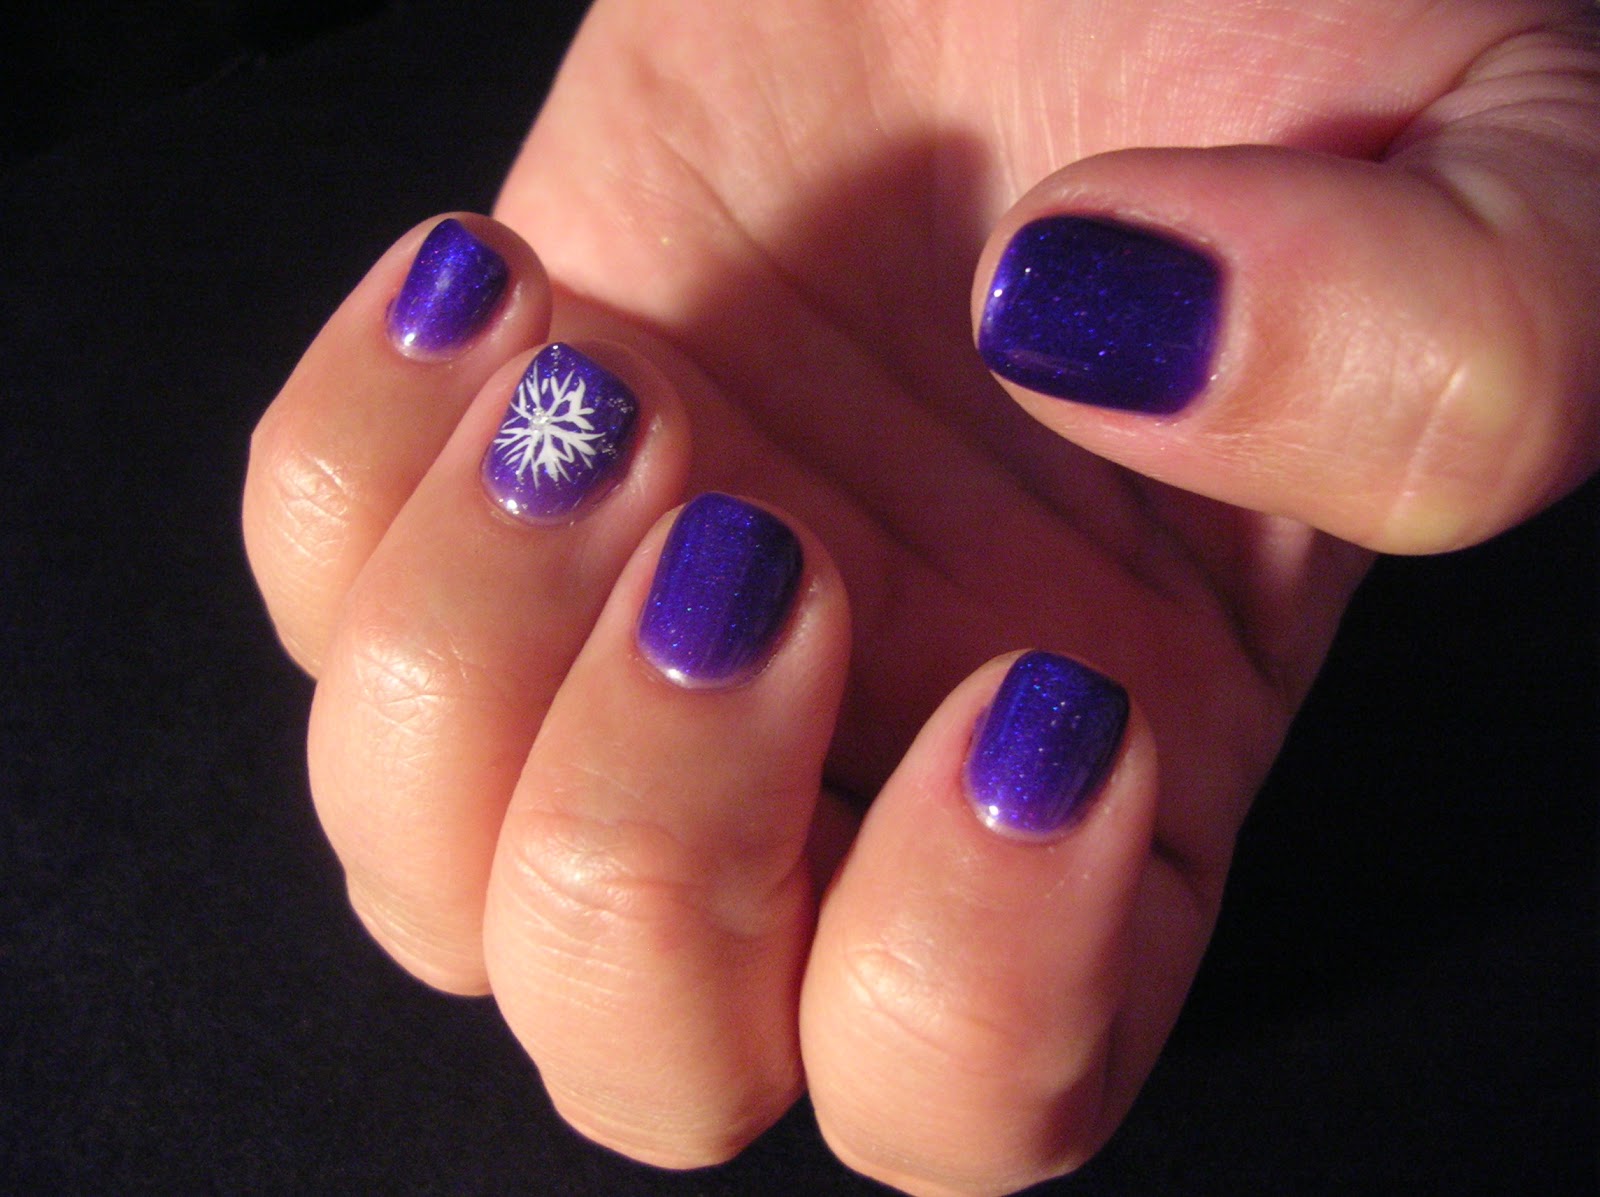 ecklipsed by color Icy indigo intrigue OPI's Tomorrow Never Dies